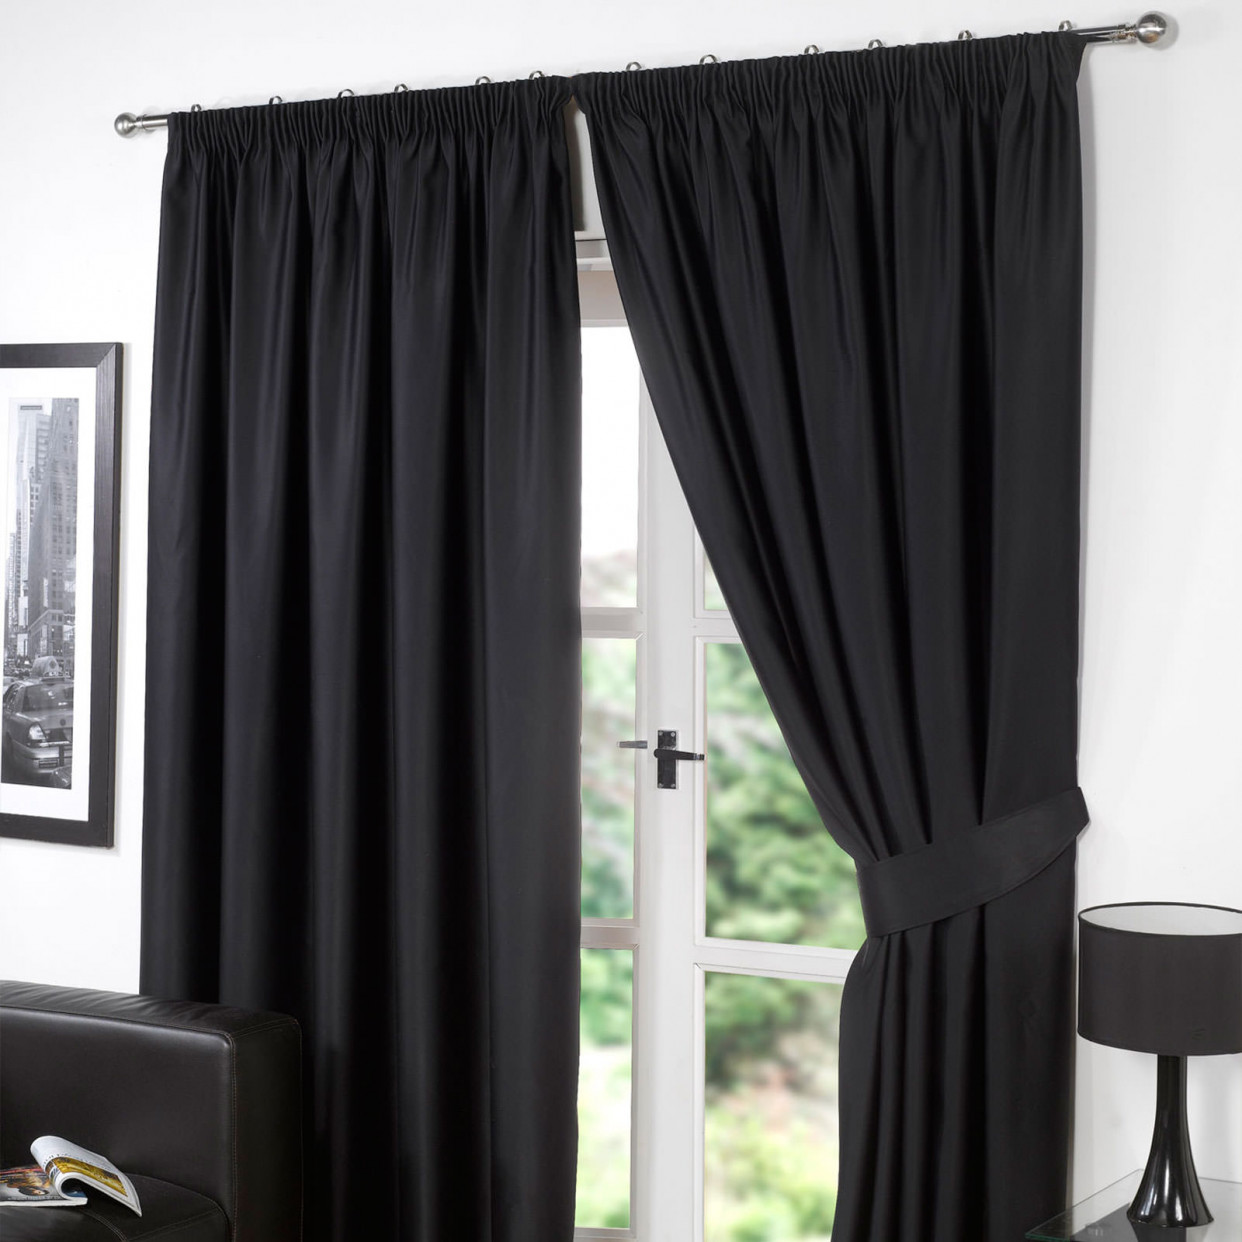 Pencil Pleat Thermal Blackout Fully Lined Curtains - Black 66x72>